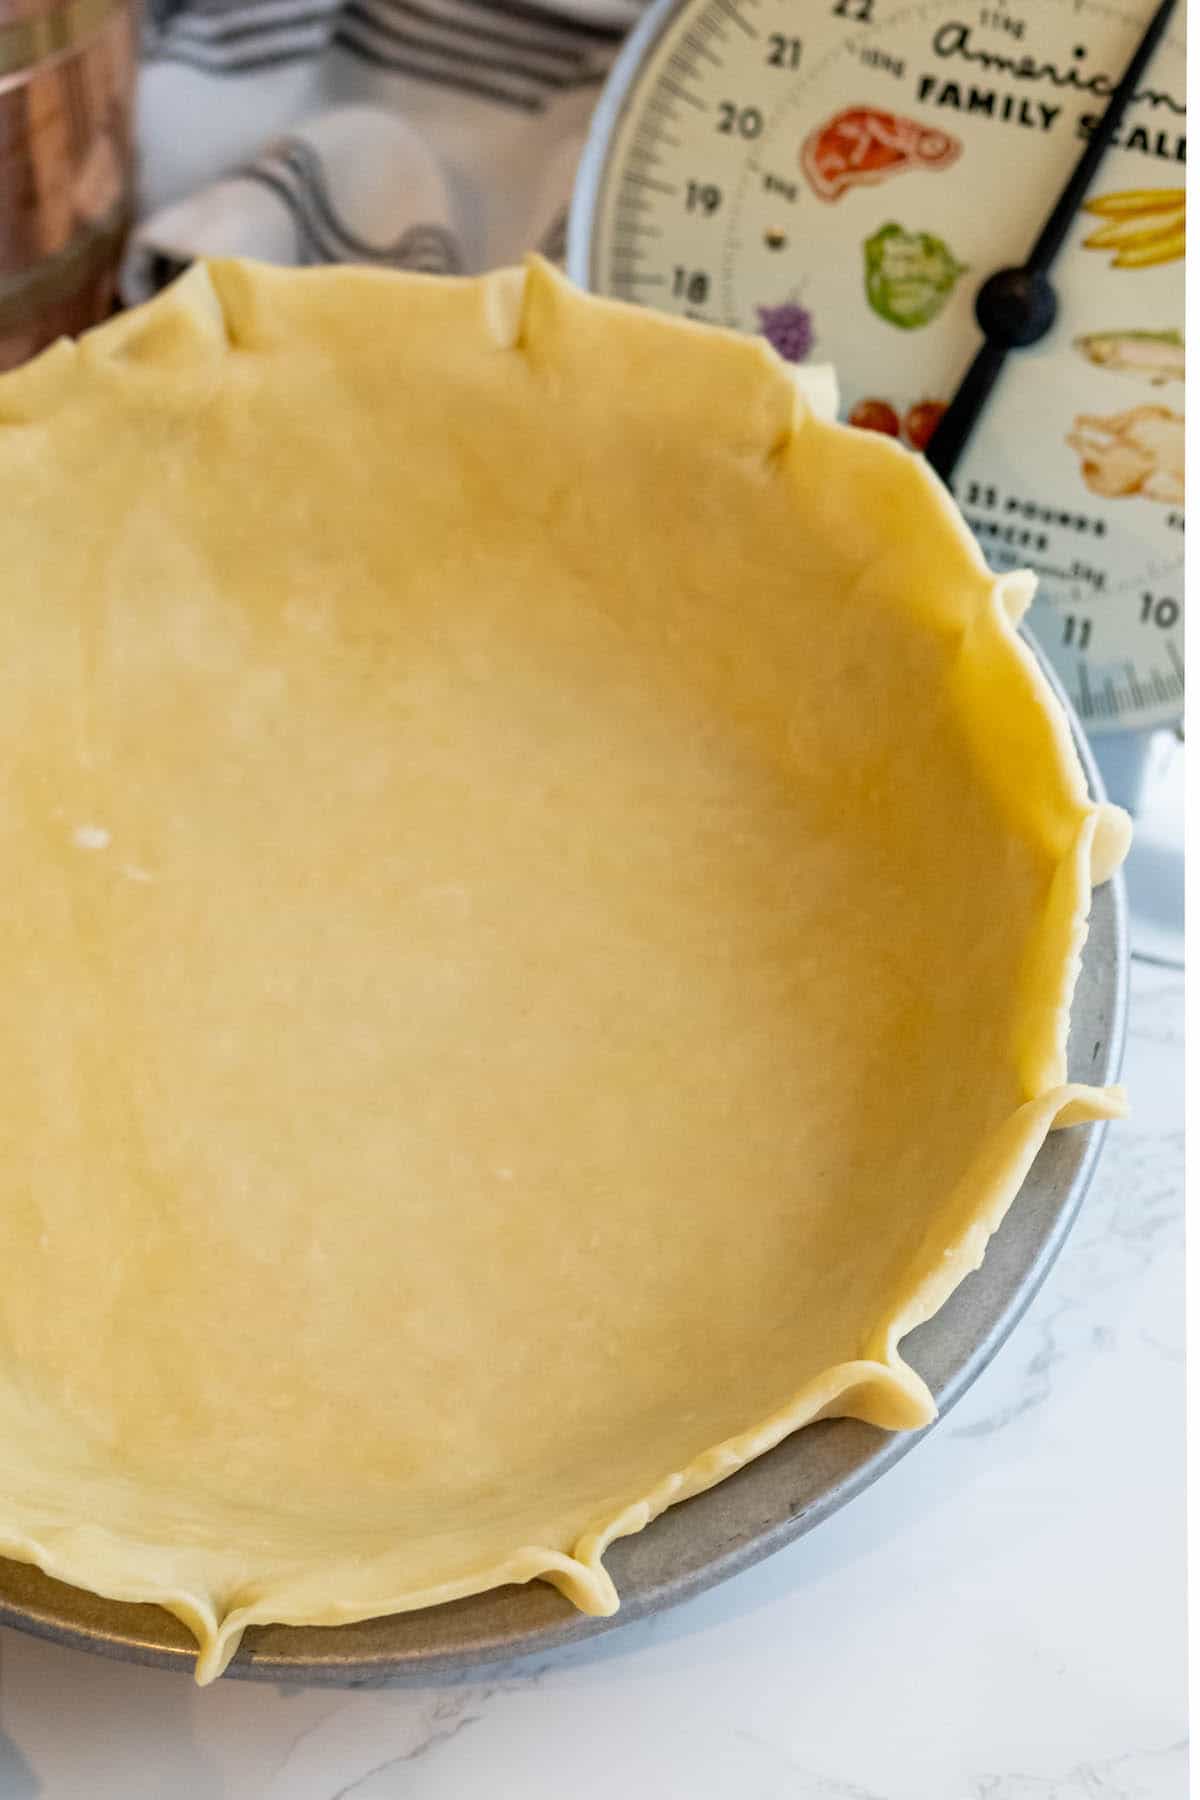 An easy pie crust is being made in a pie pan.